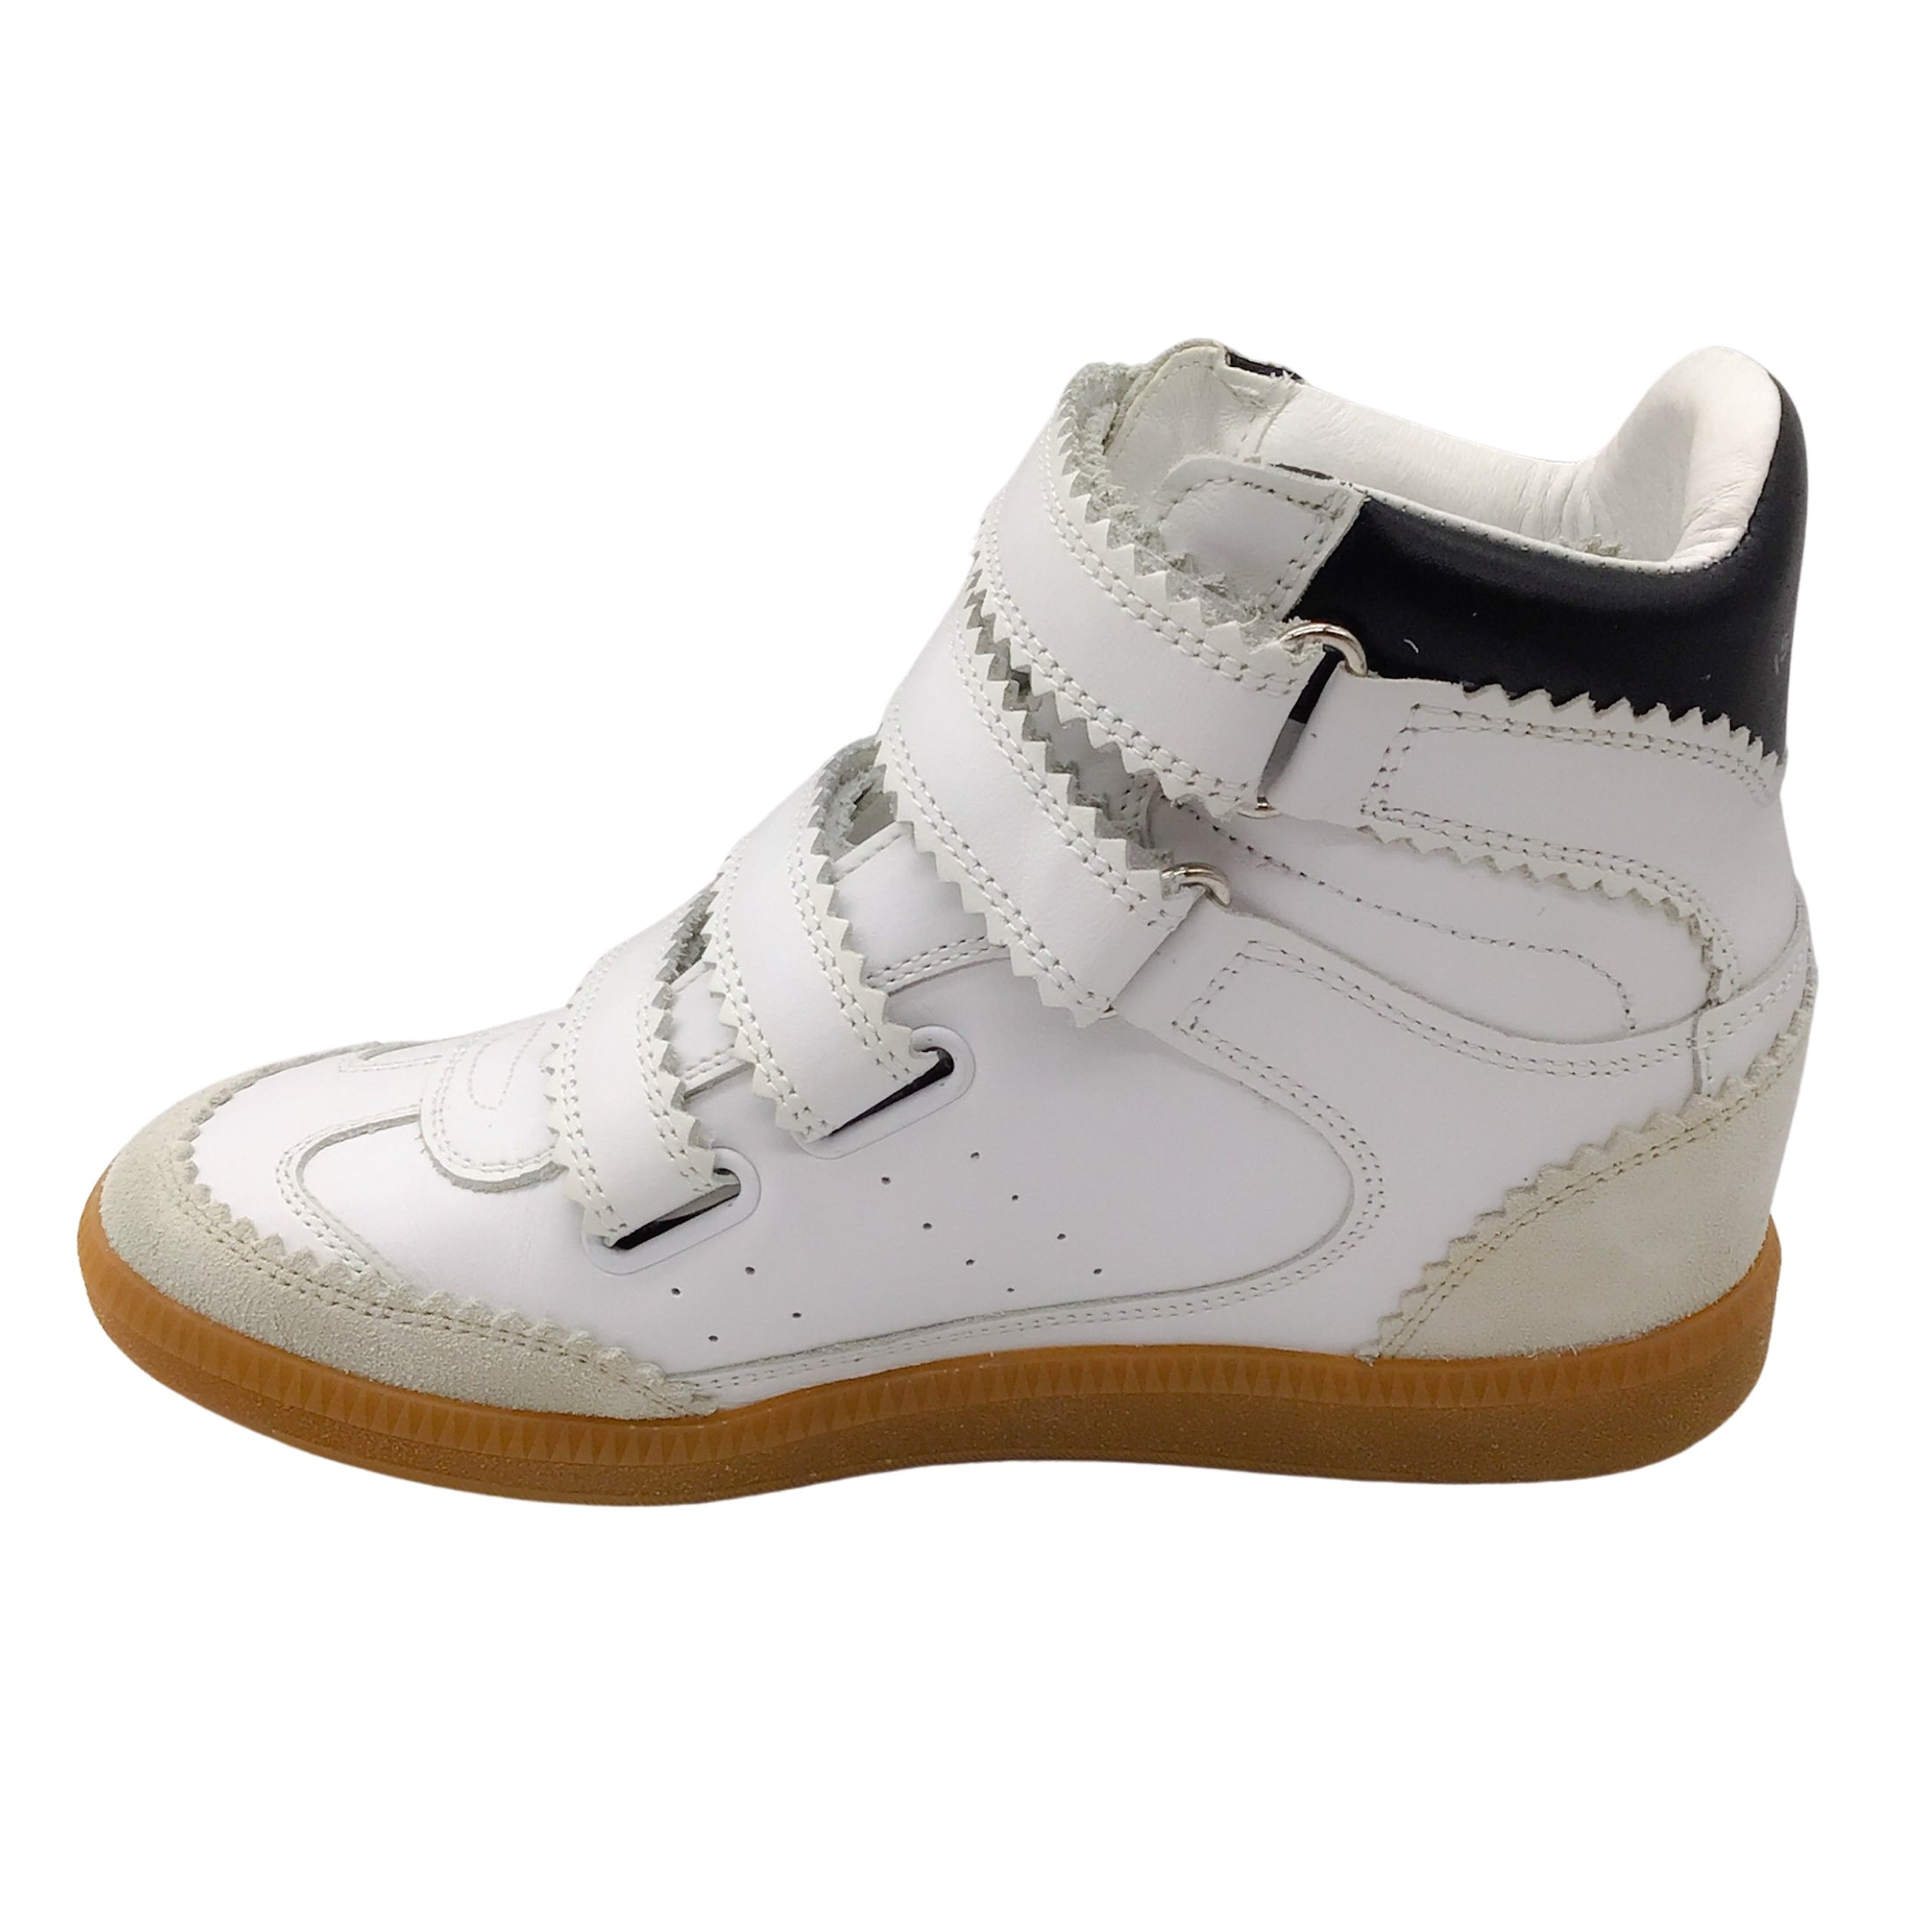 Isabel Marant Bilsy White / Black Suede Trimmed High Top Leather Sneakers